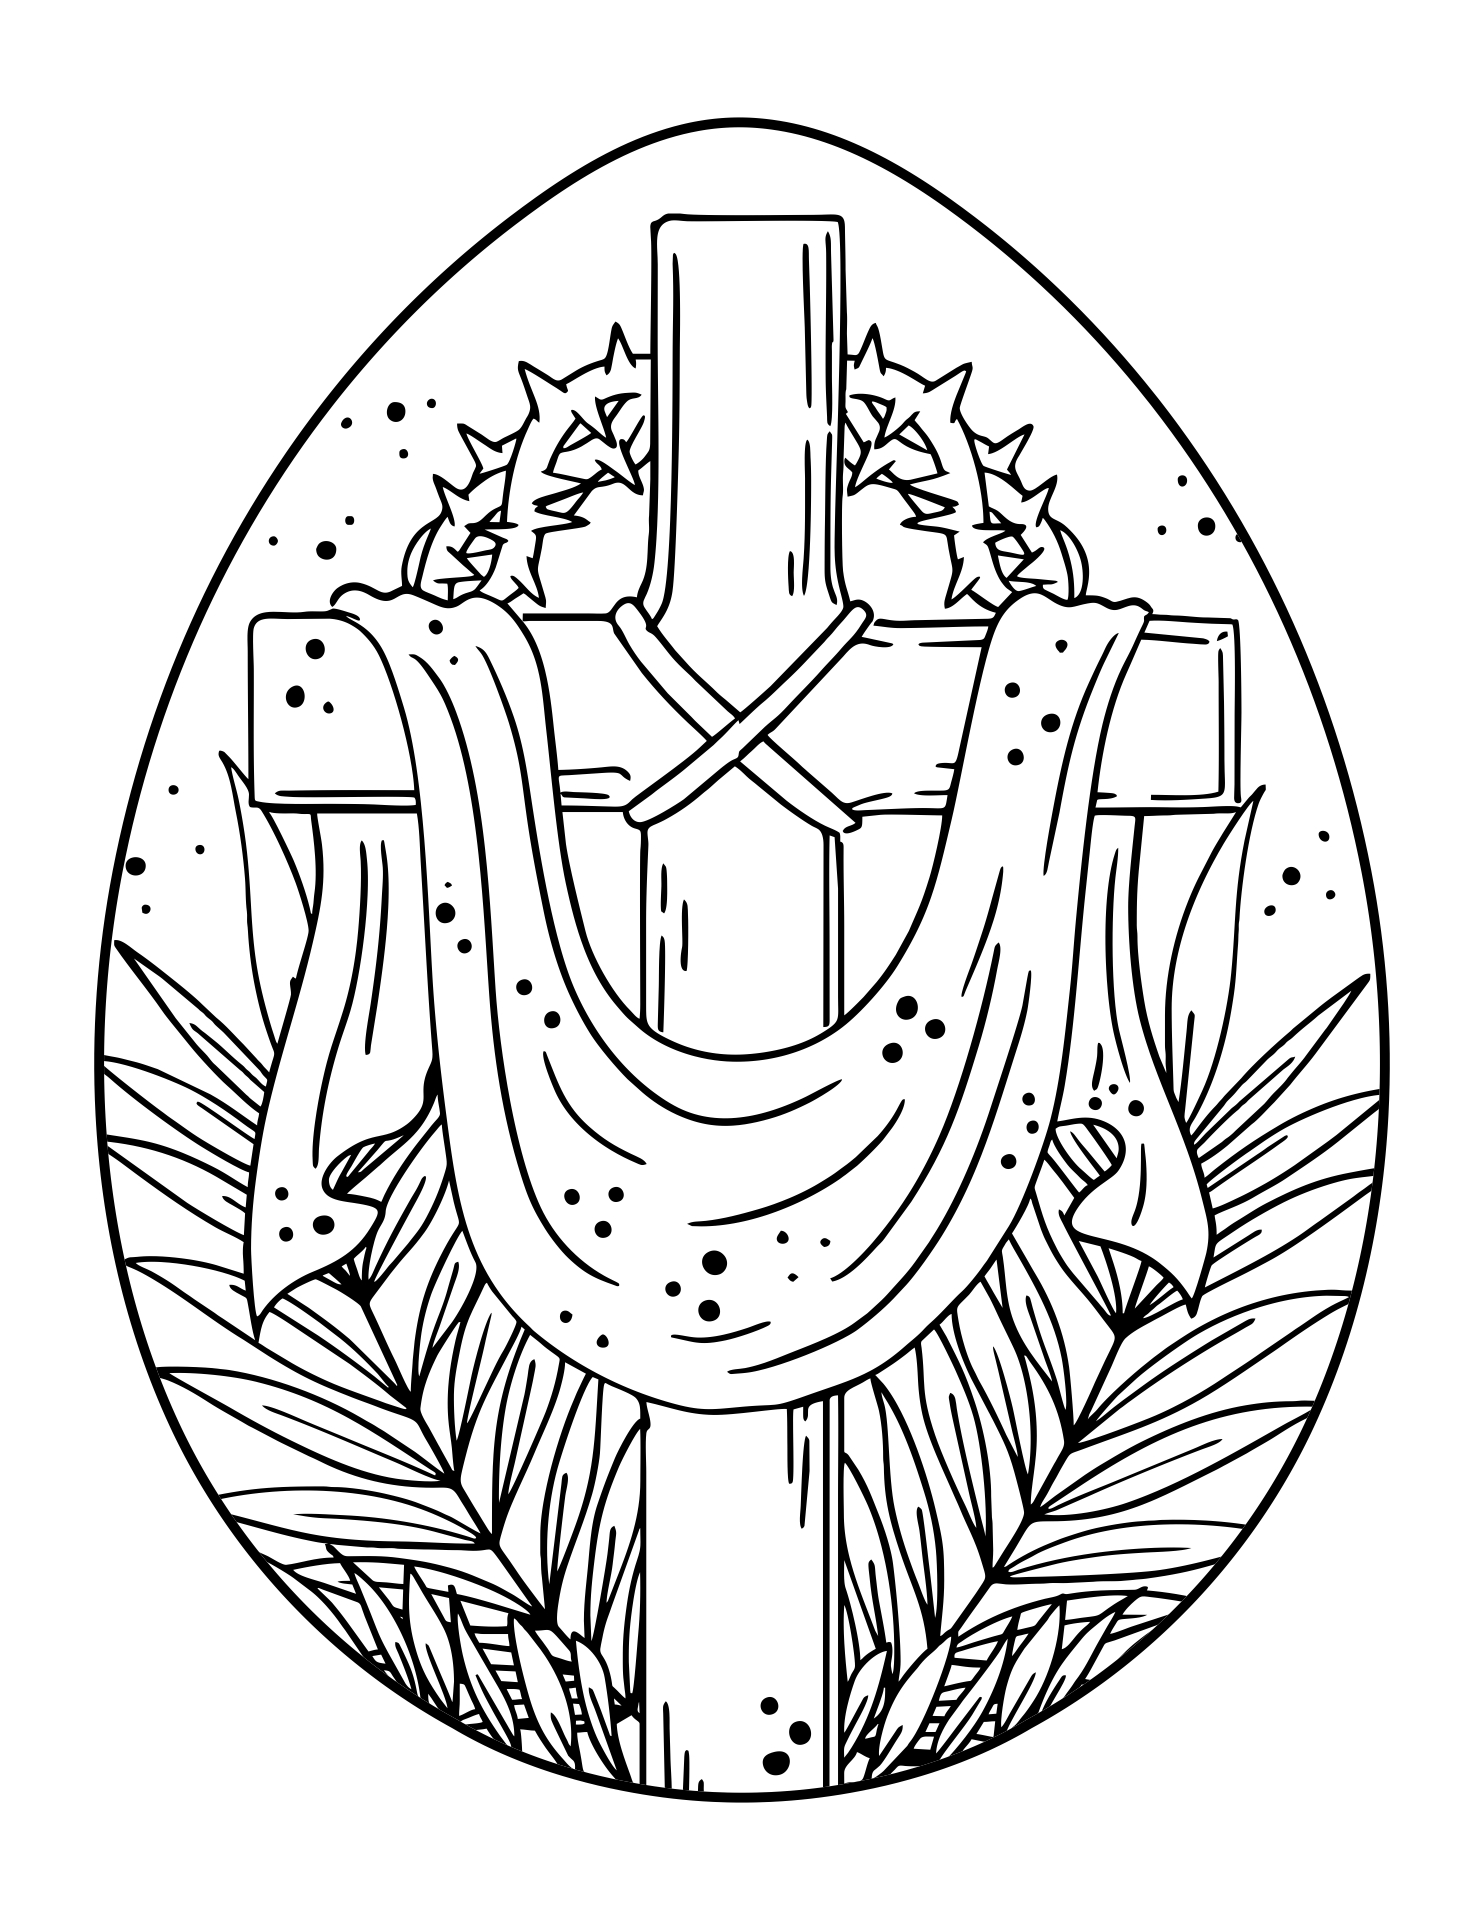 Easter Egg Cross Coloring Page